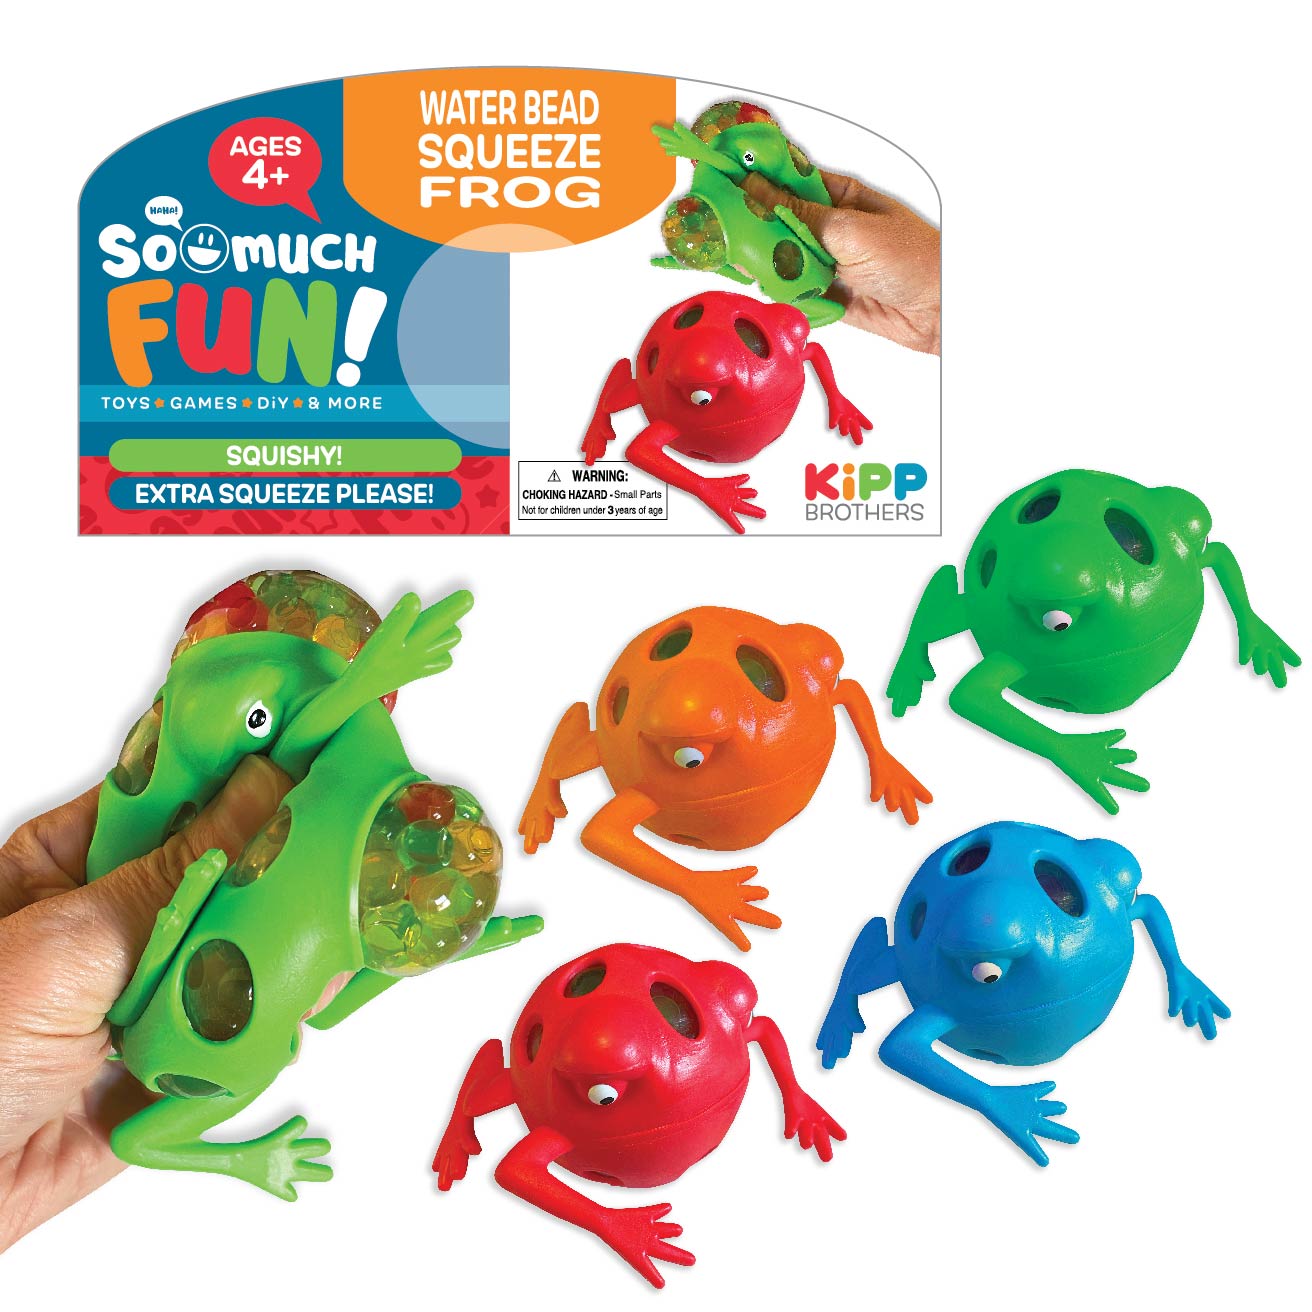 Squish & Squeeze Frog Water Bead Ball Toy - 12 Pieces Per Pack 23212 –  NOVELTY INC WHOLESALE